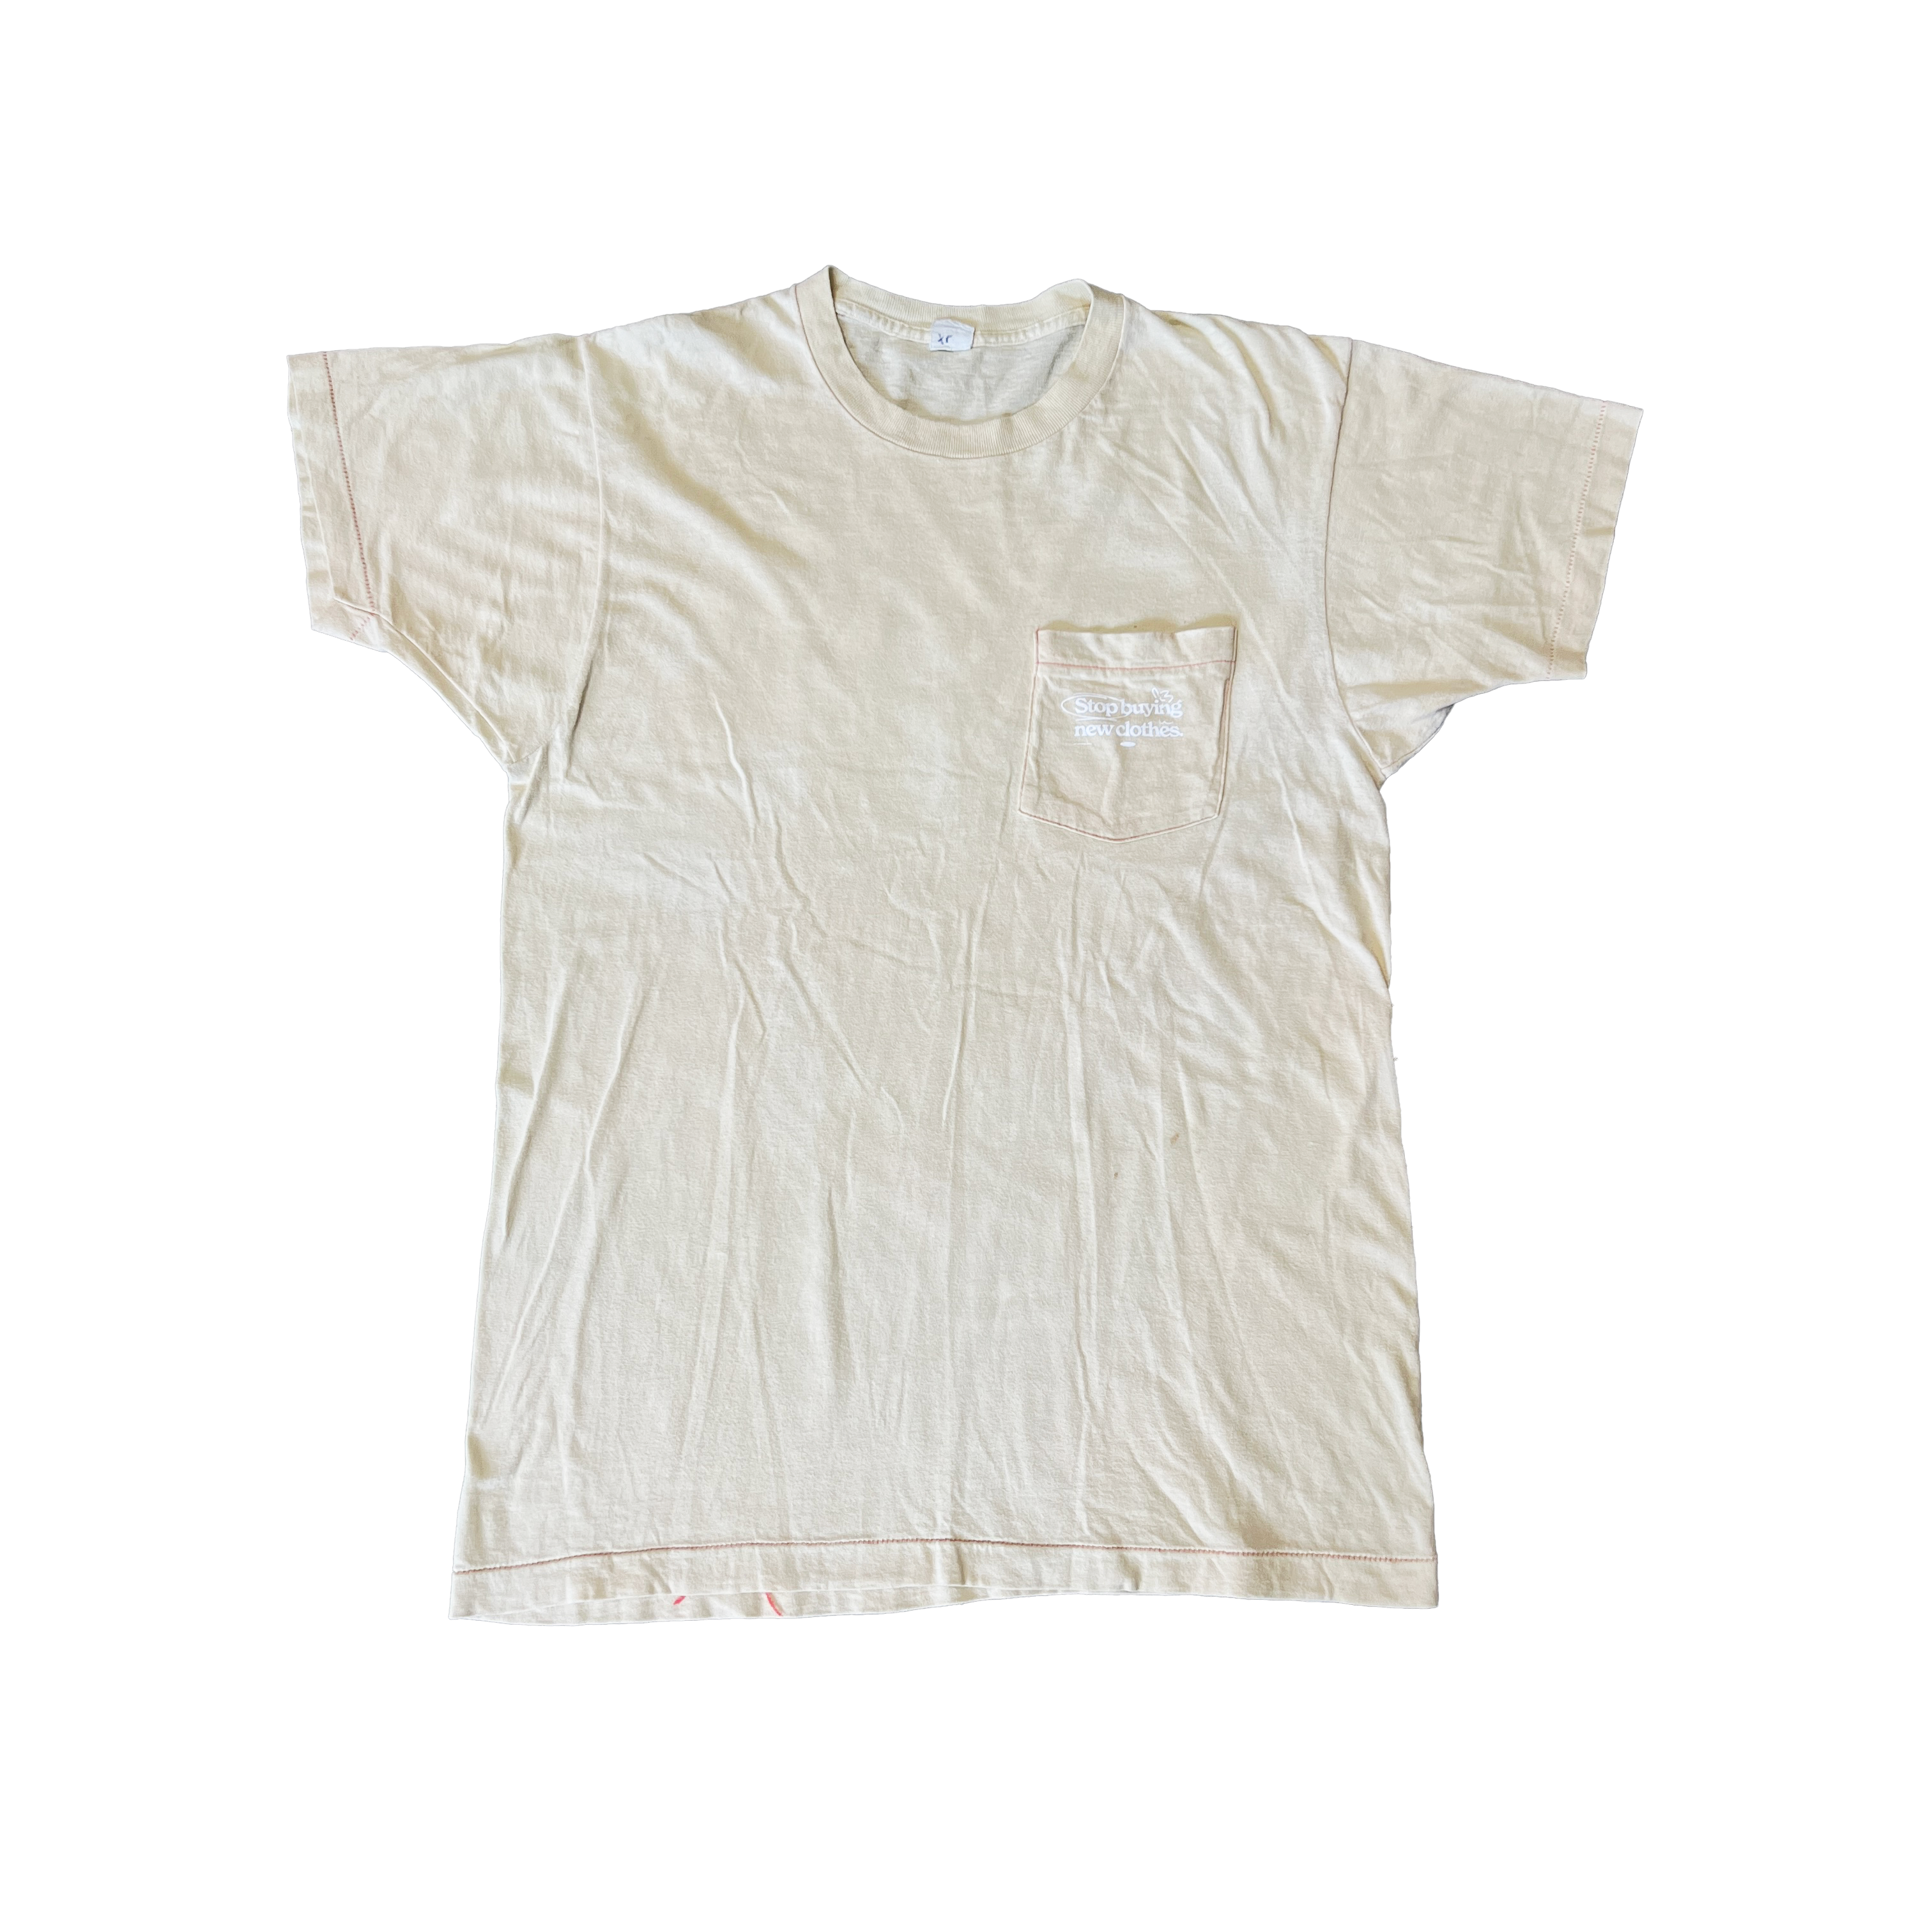 STOP BUYING NEW UPCYCLED TEE (TAN XL)